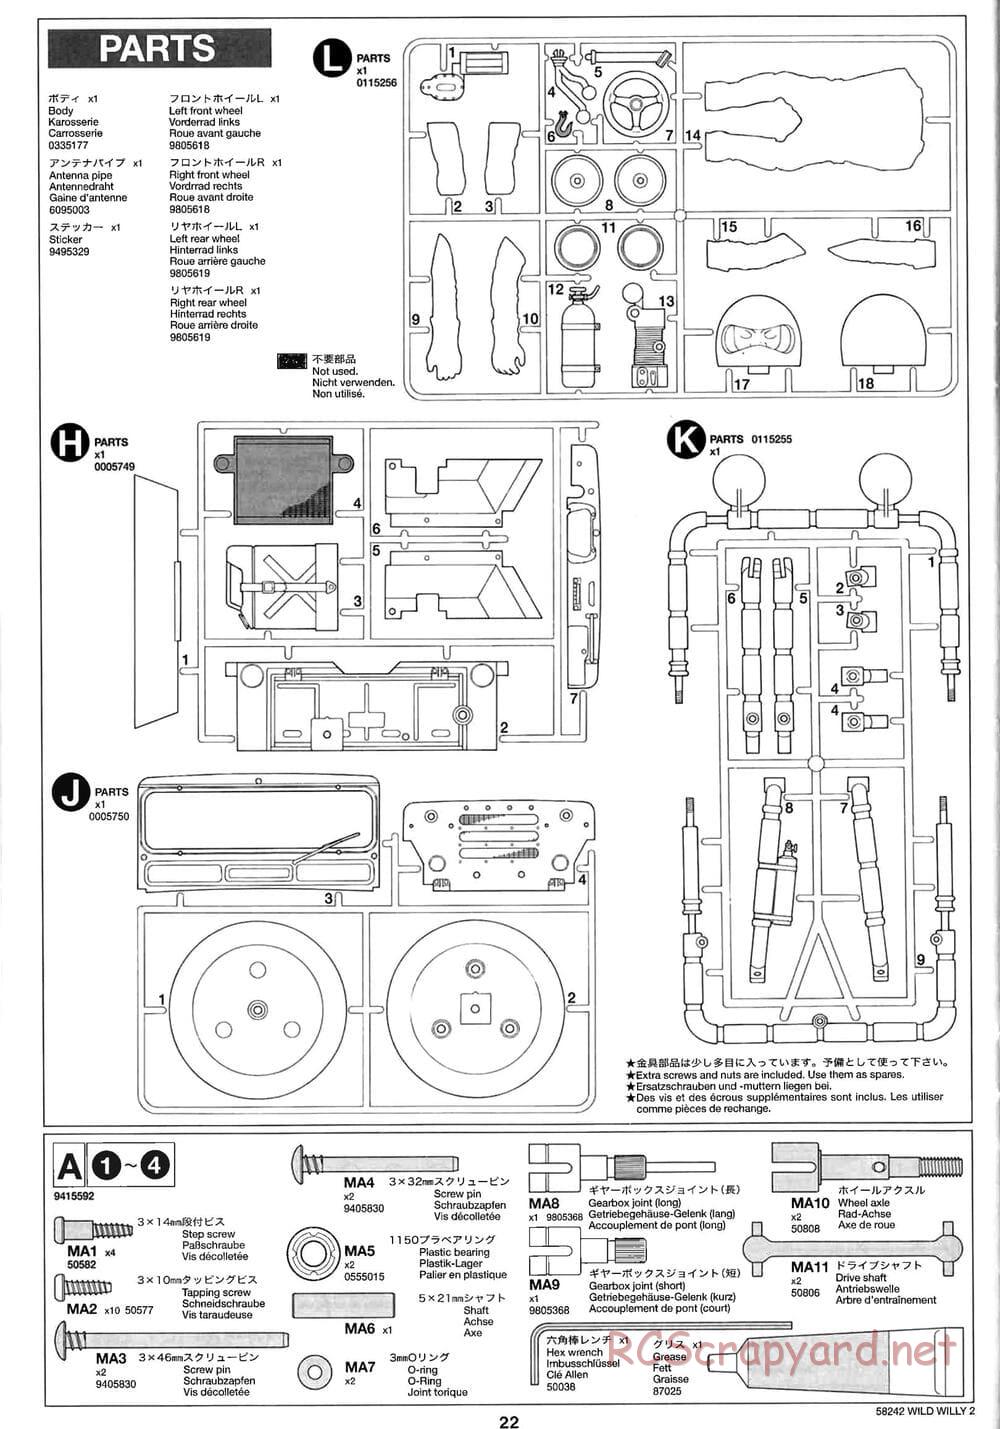 Tamiya - Wild Willy 2 - WR-02 Chassis - Manual - Page 22